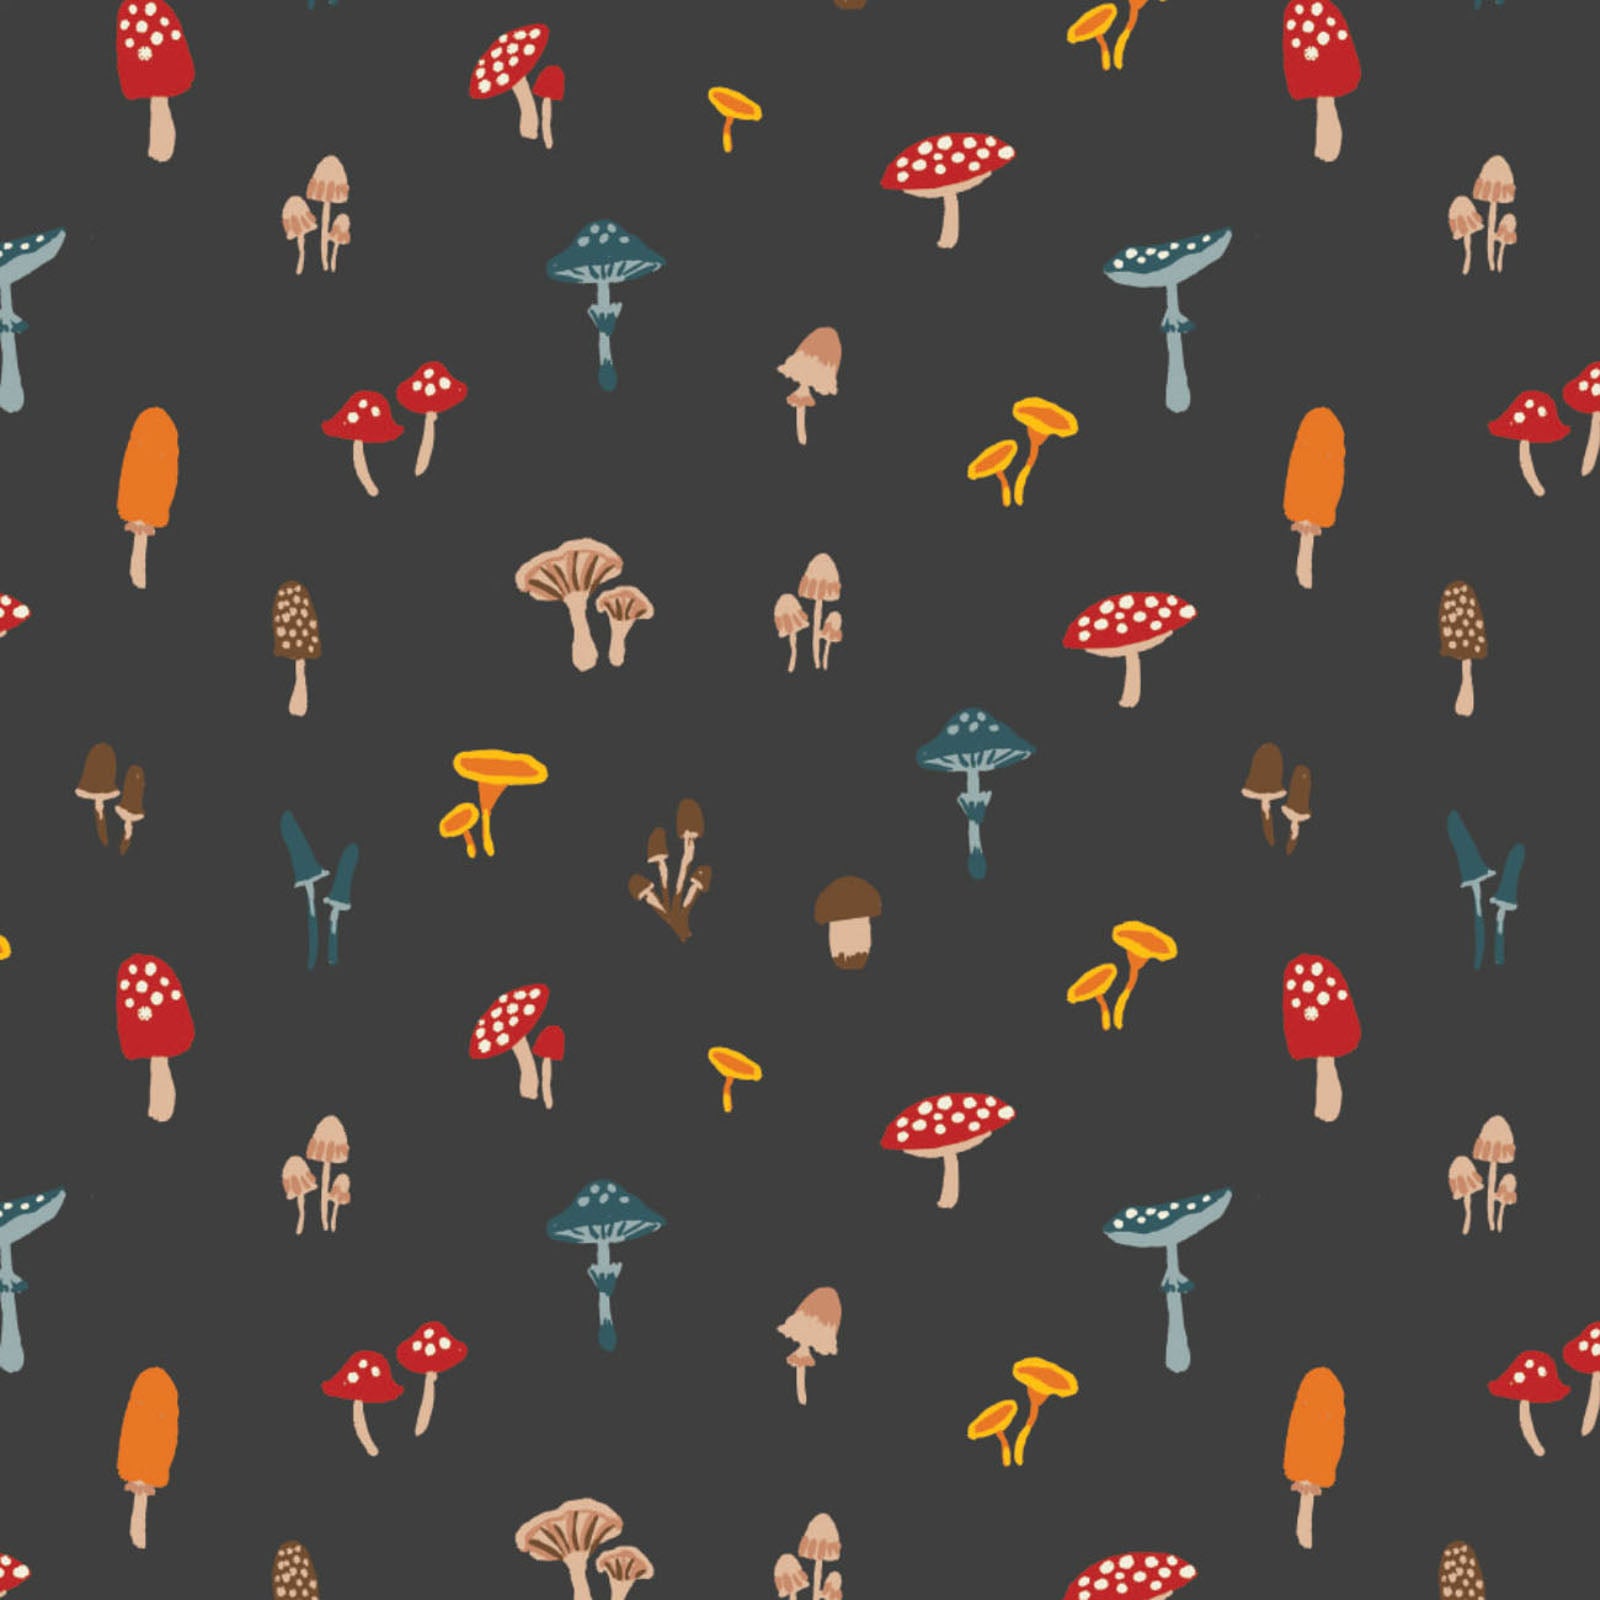 Camelot - Sweater Weather - Toadstools - CAM82200103-02 (1/2 Yard)